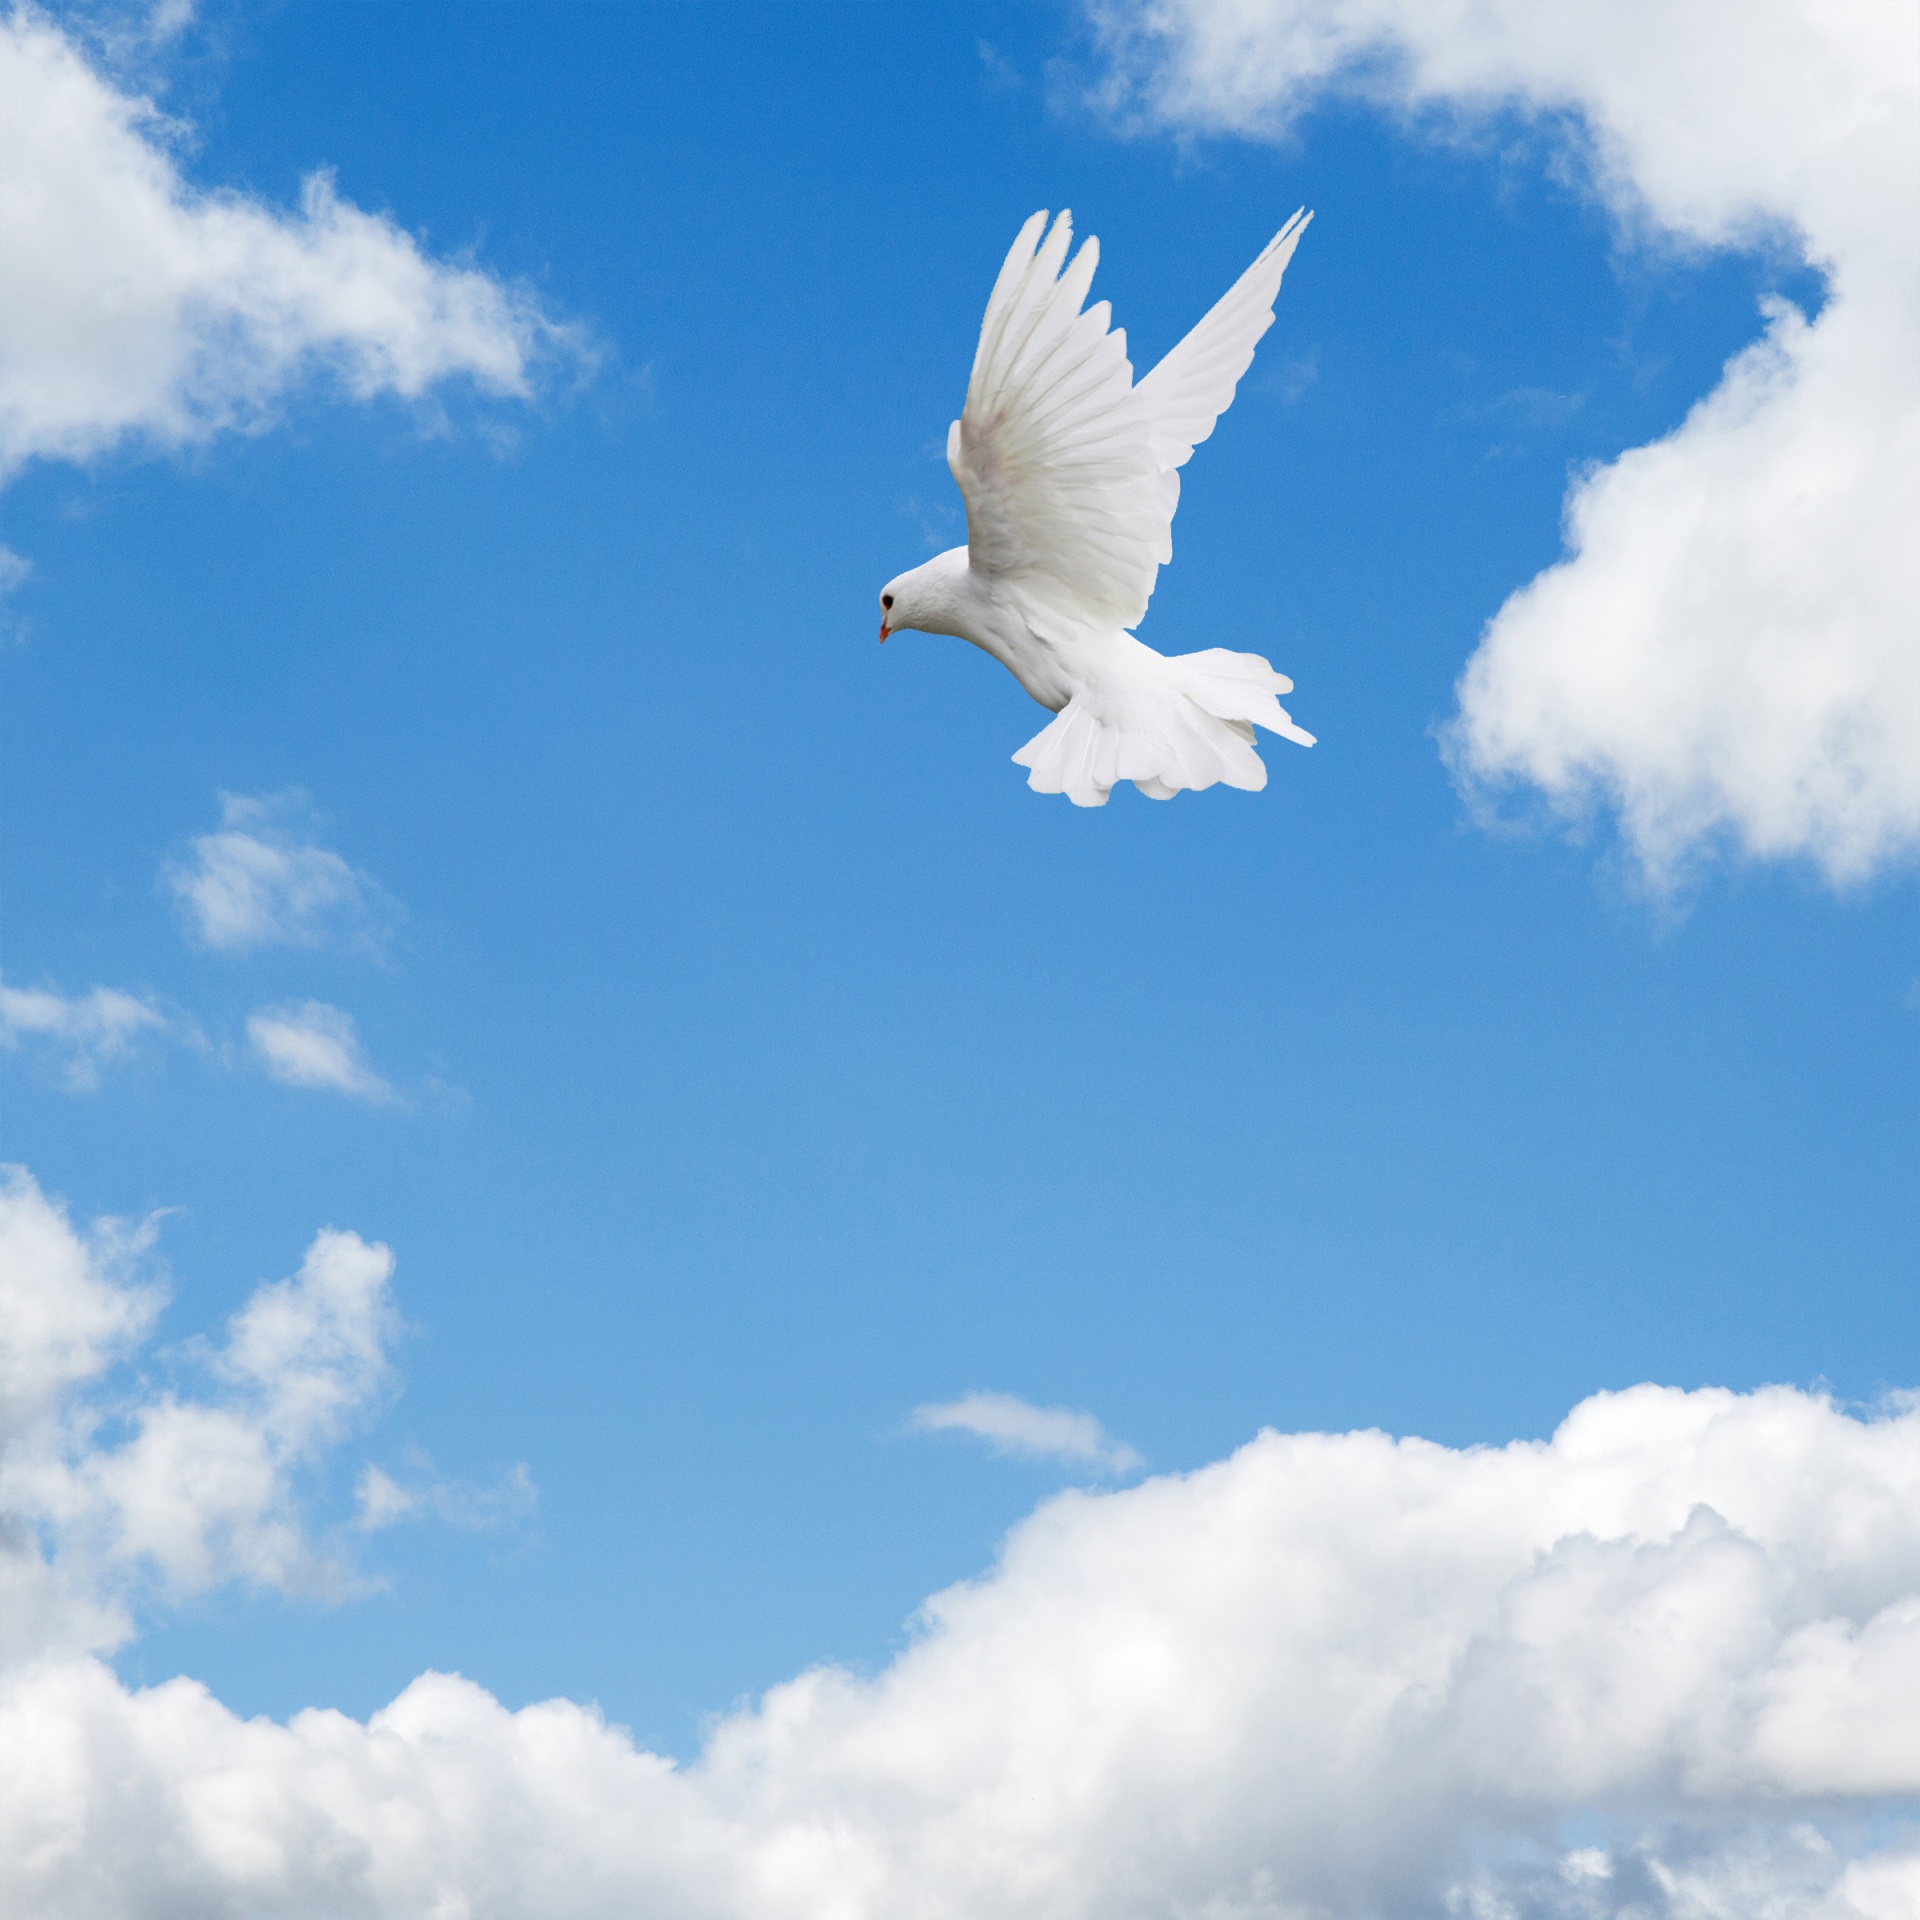 White dove flying high in the blue sky and clouds